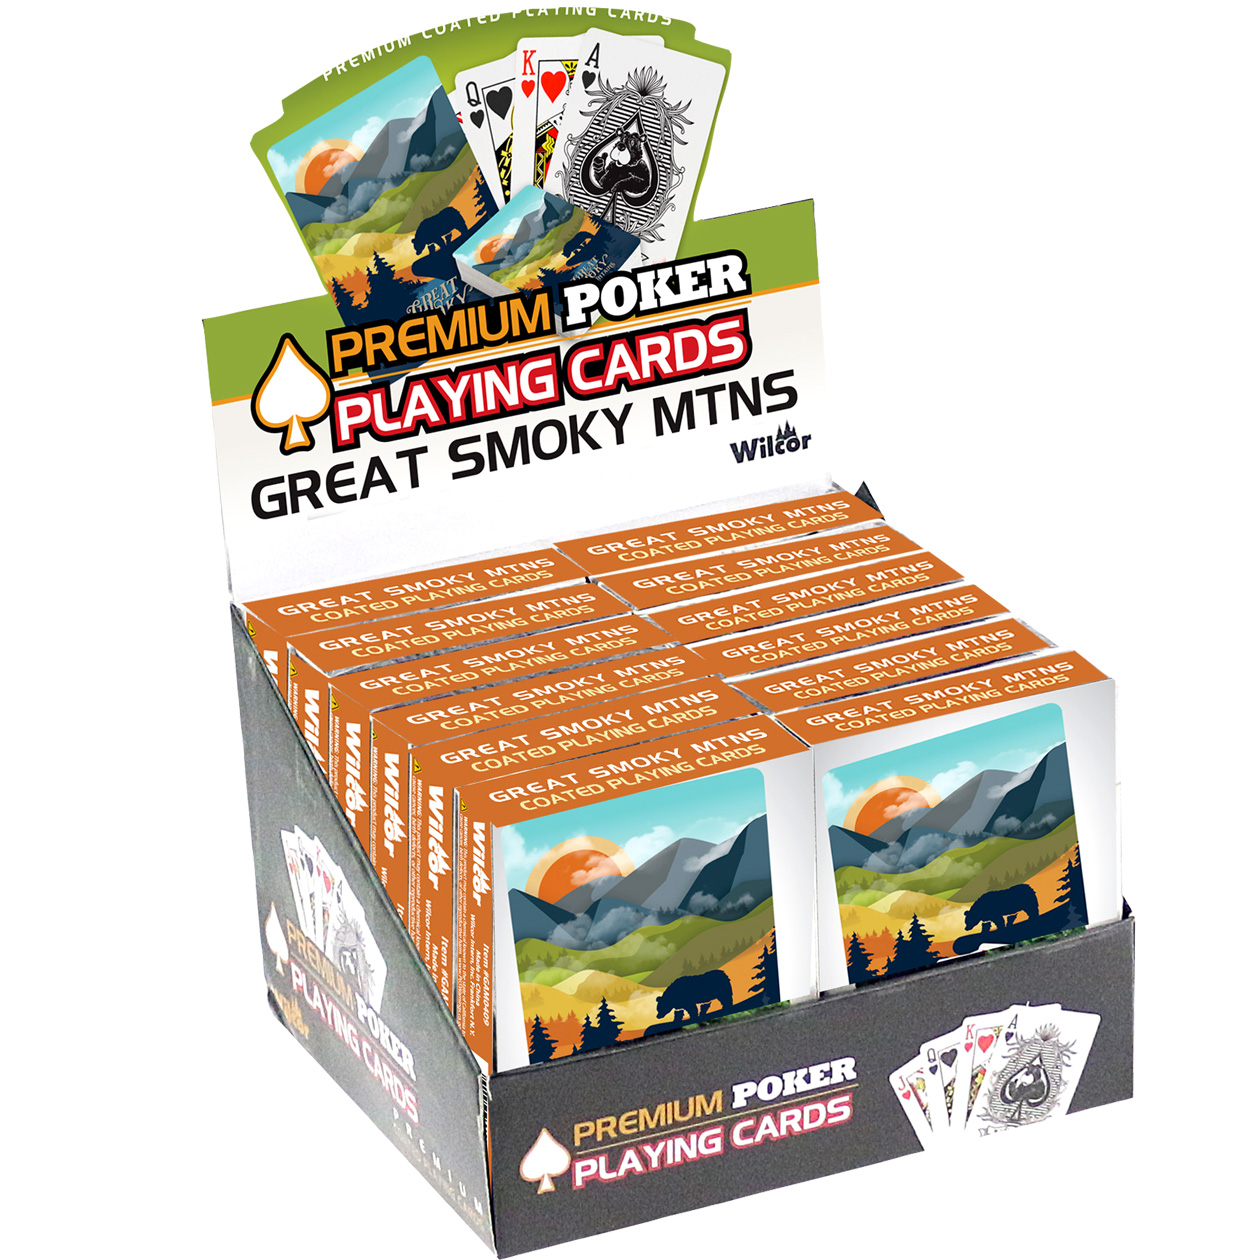 GREAT SMOKY MTNS PLAYING CARDS